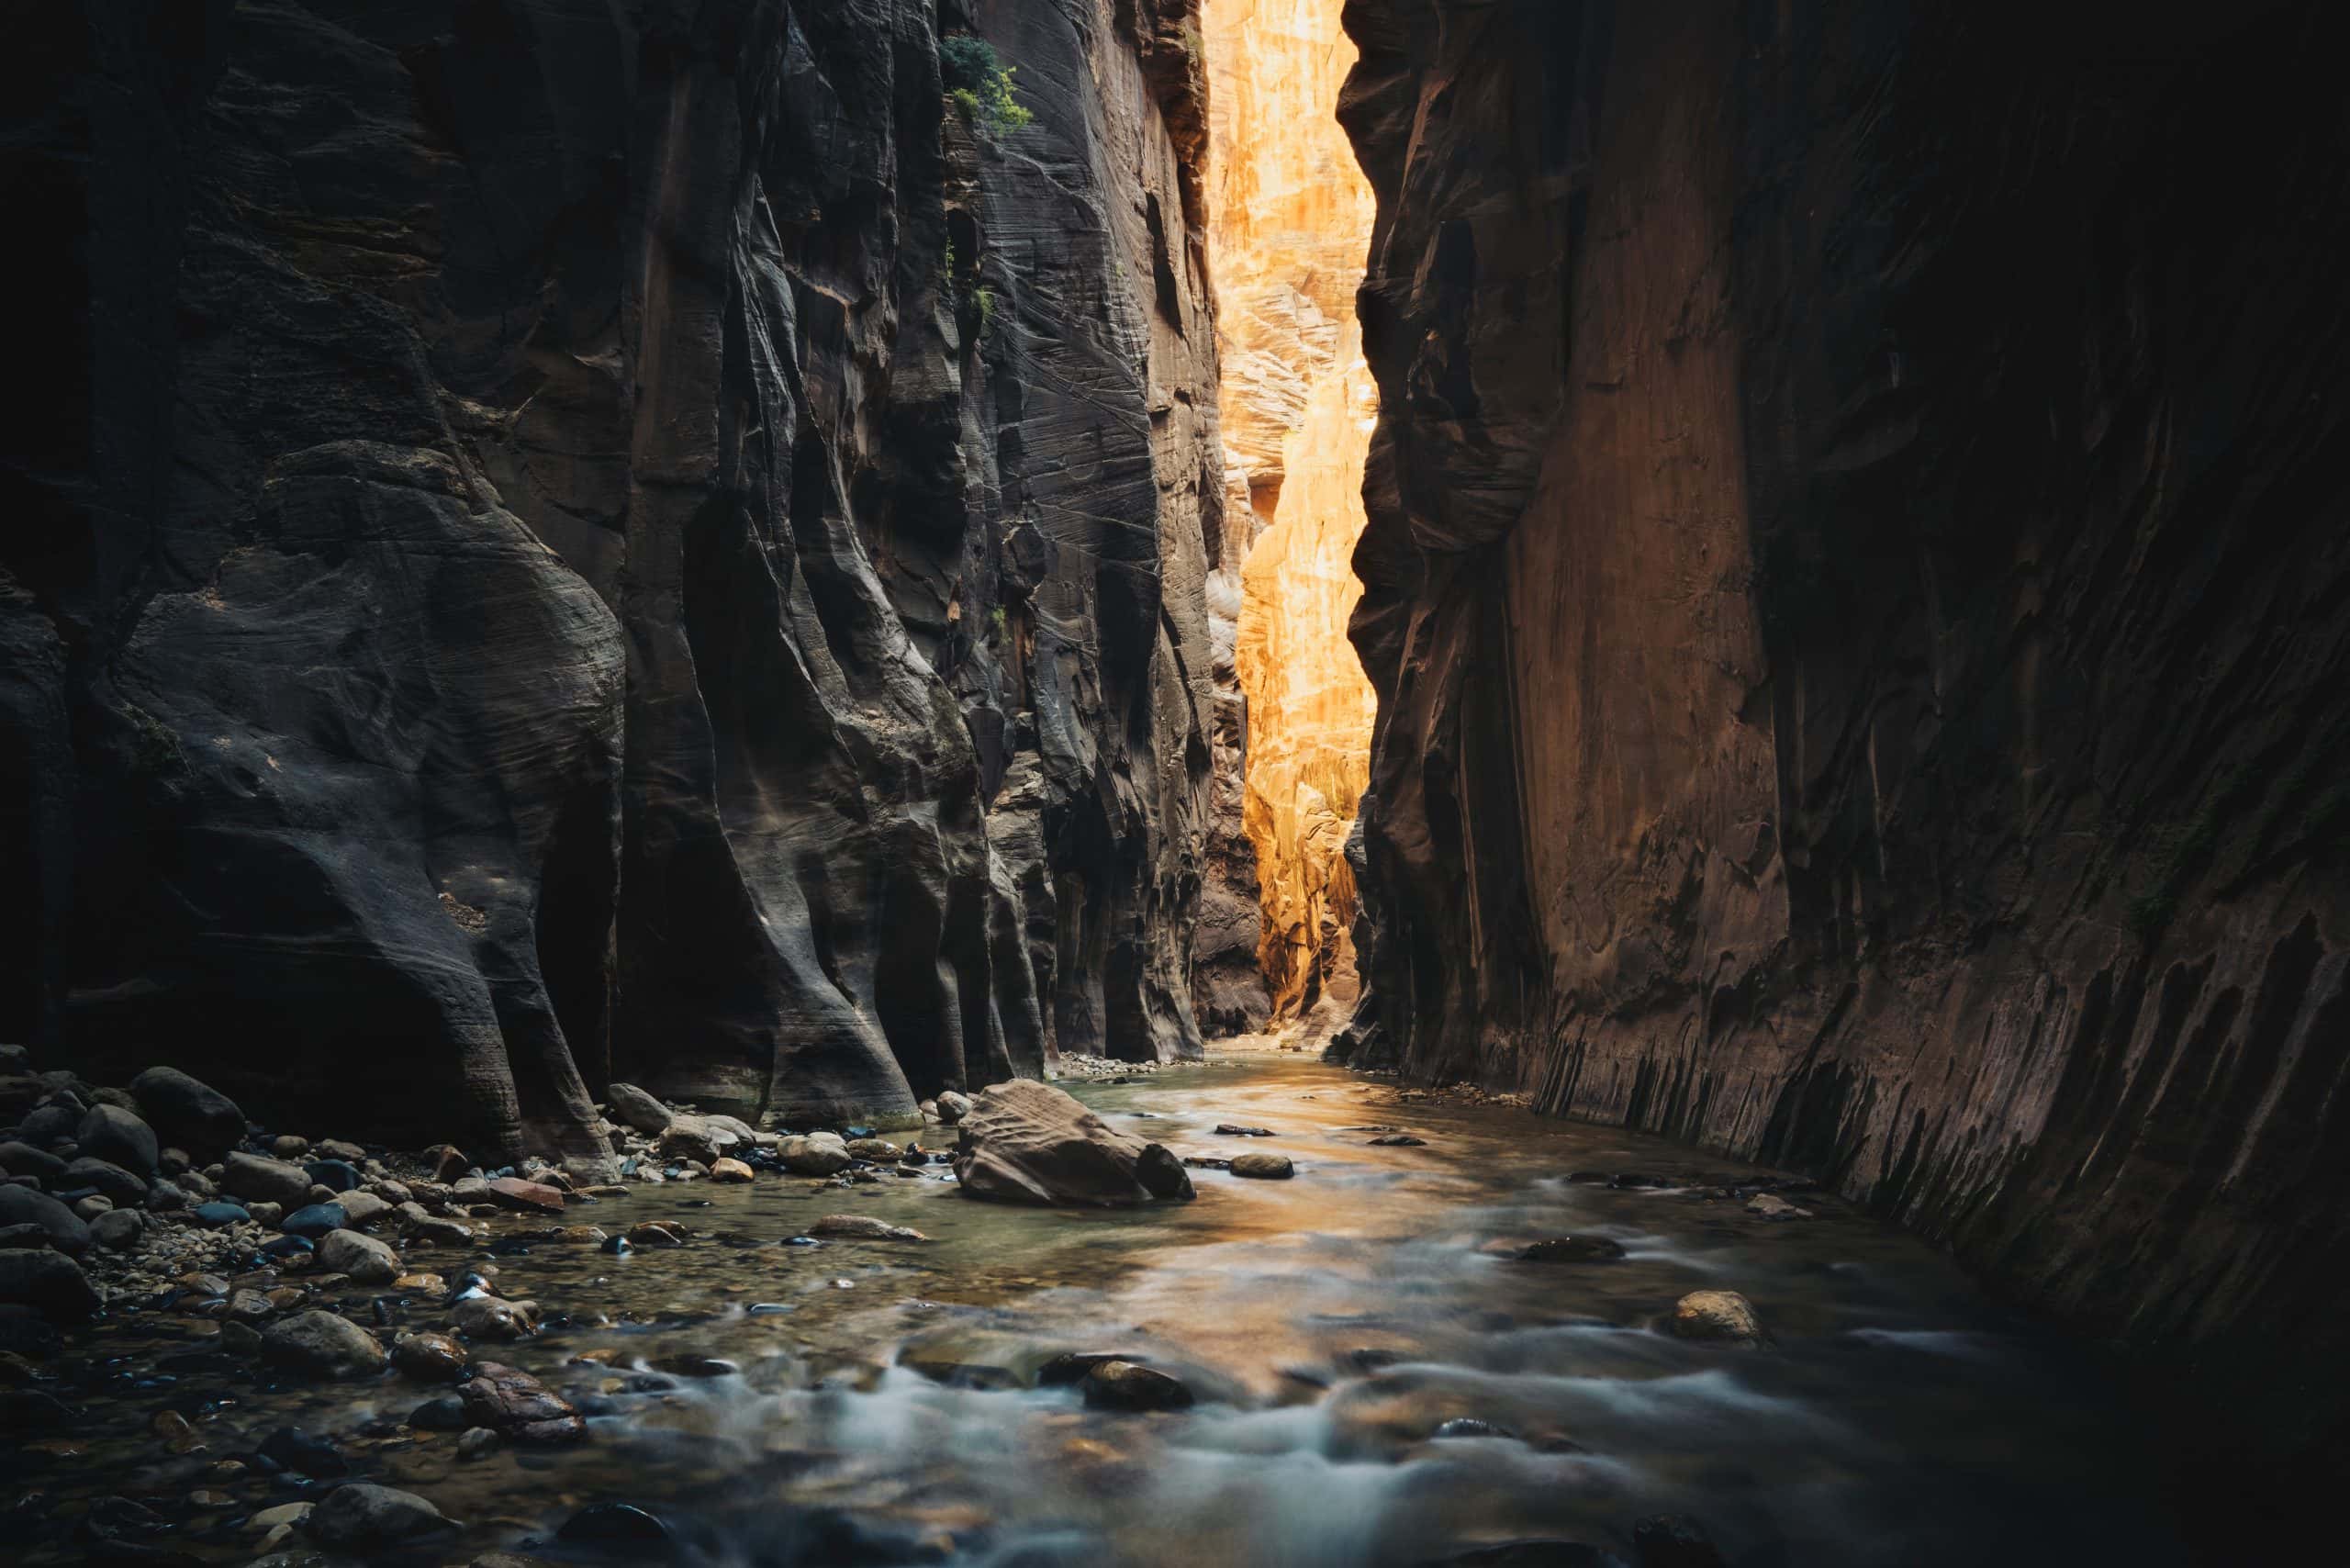 The Zion Narrows 